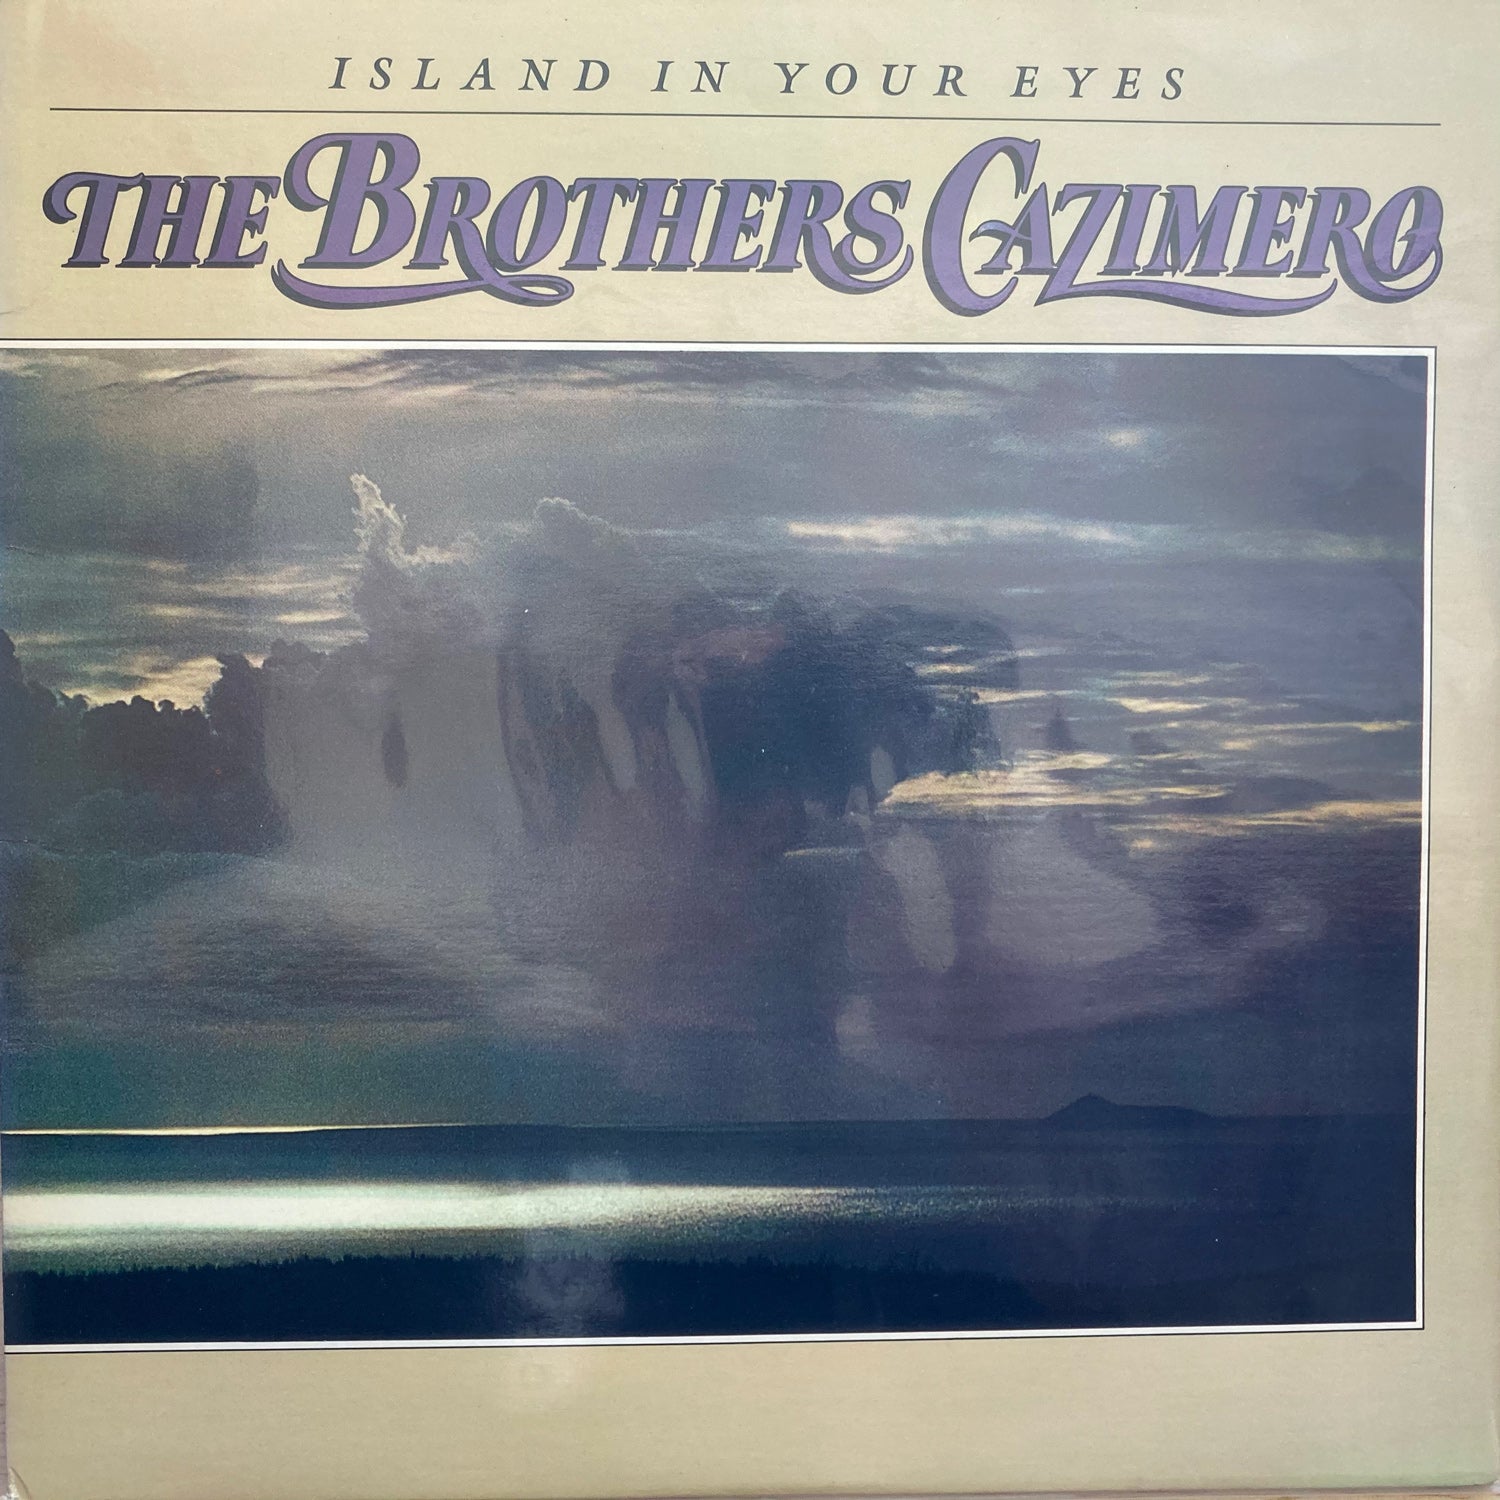 The Brothers Cazimero - lsland In Your Eyes